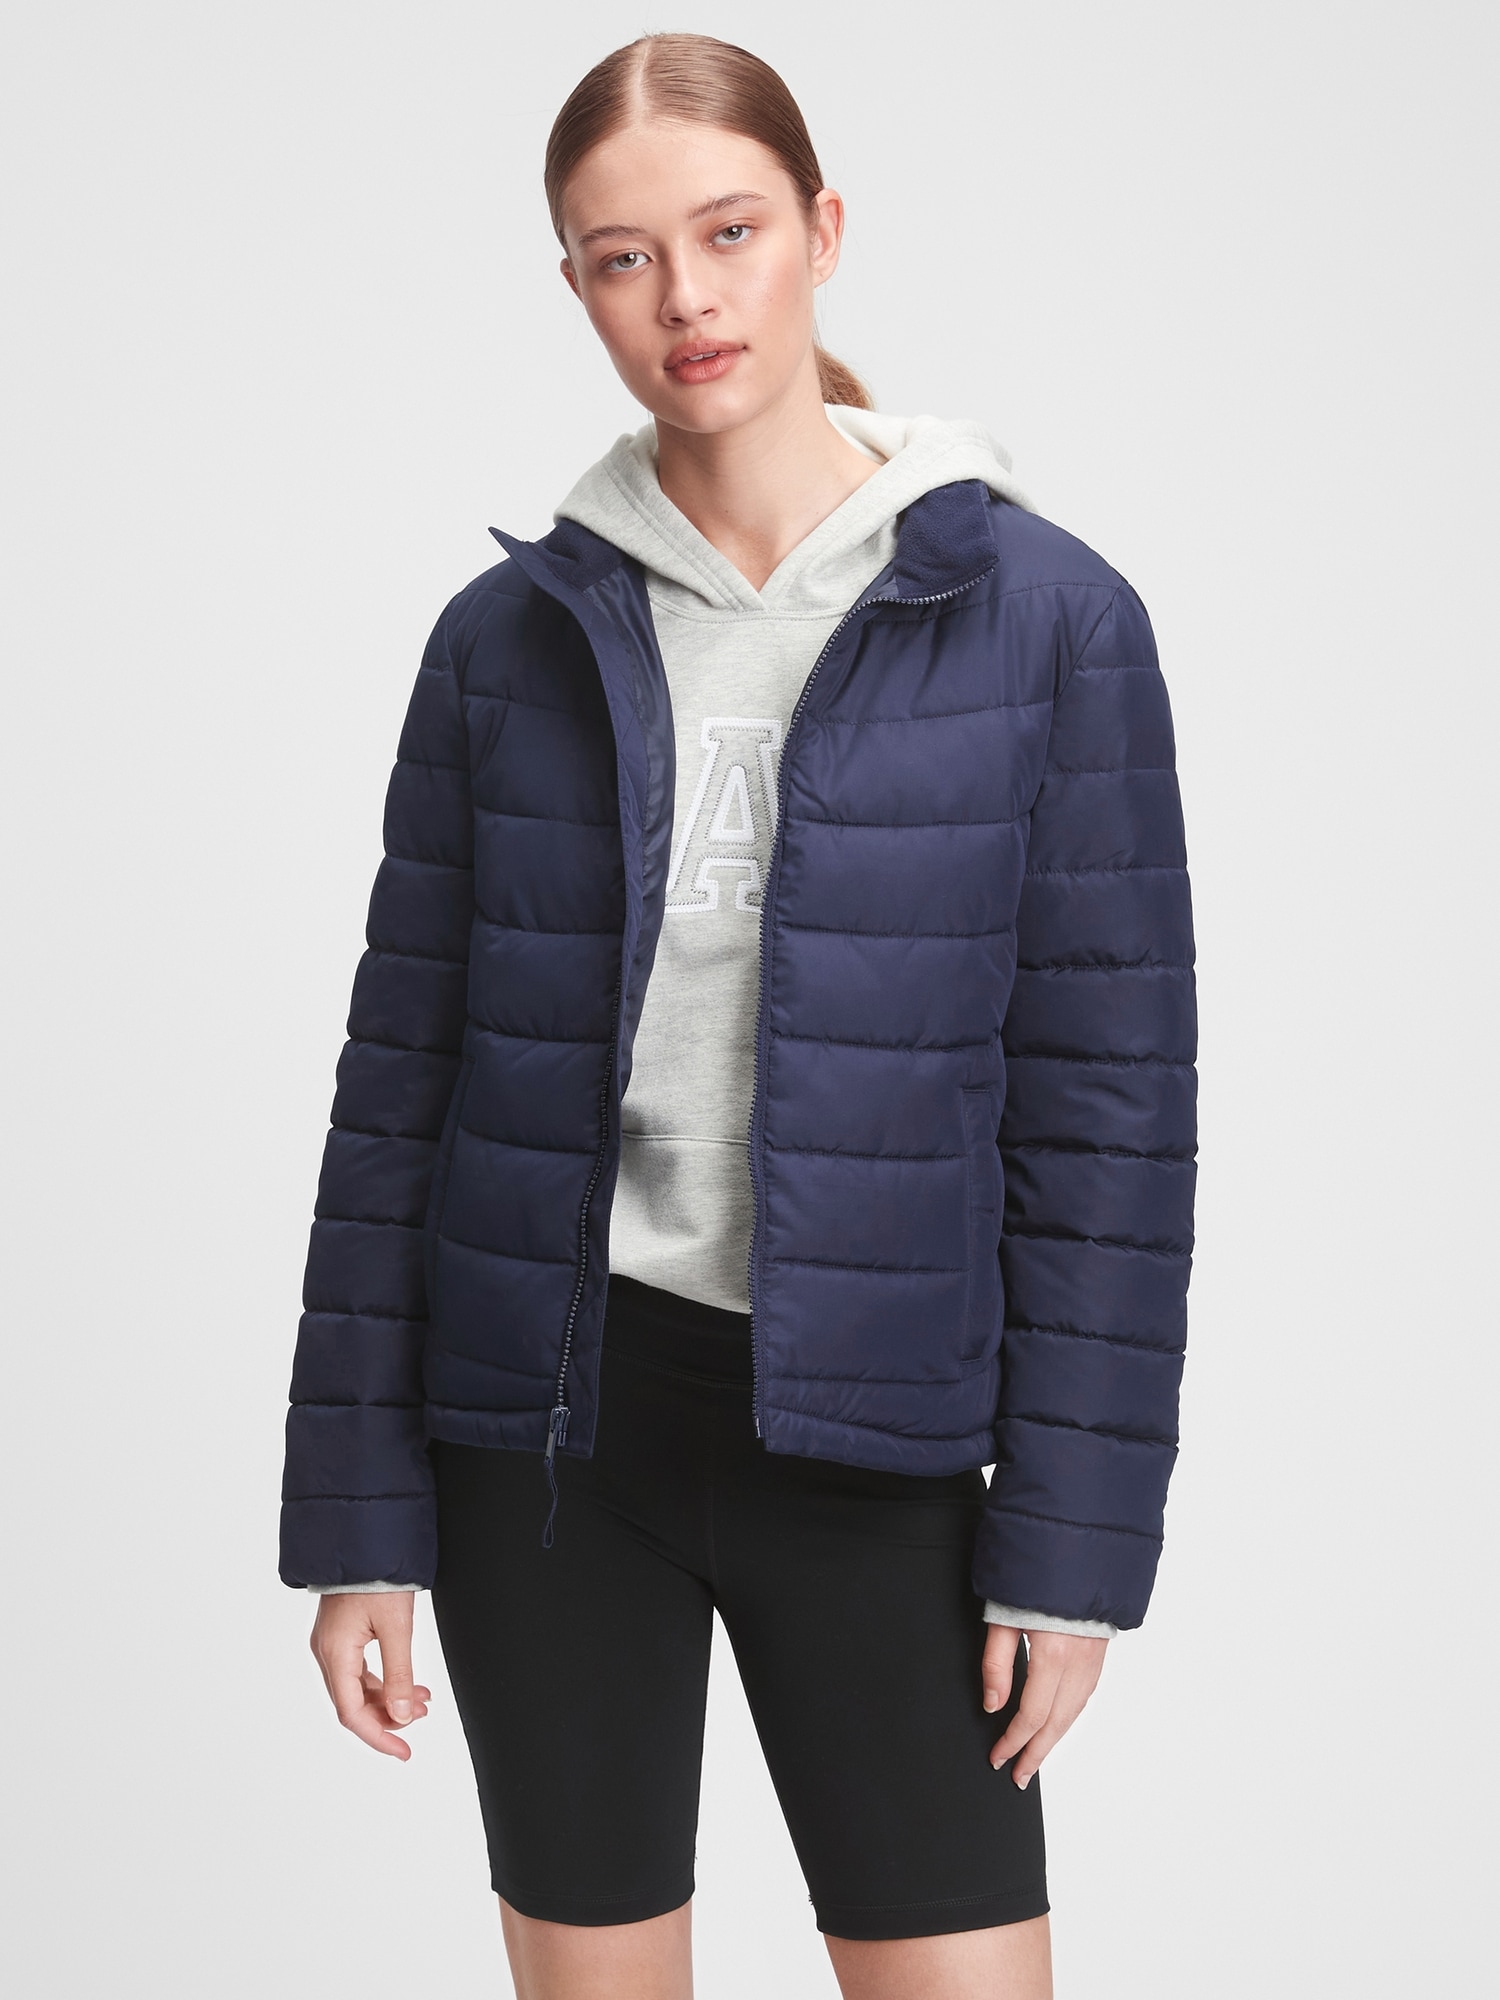 ColdControl Puffer Jacket | Gap Factory